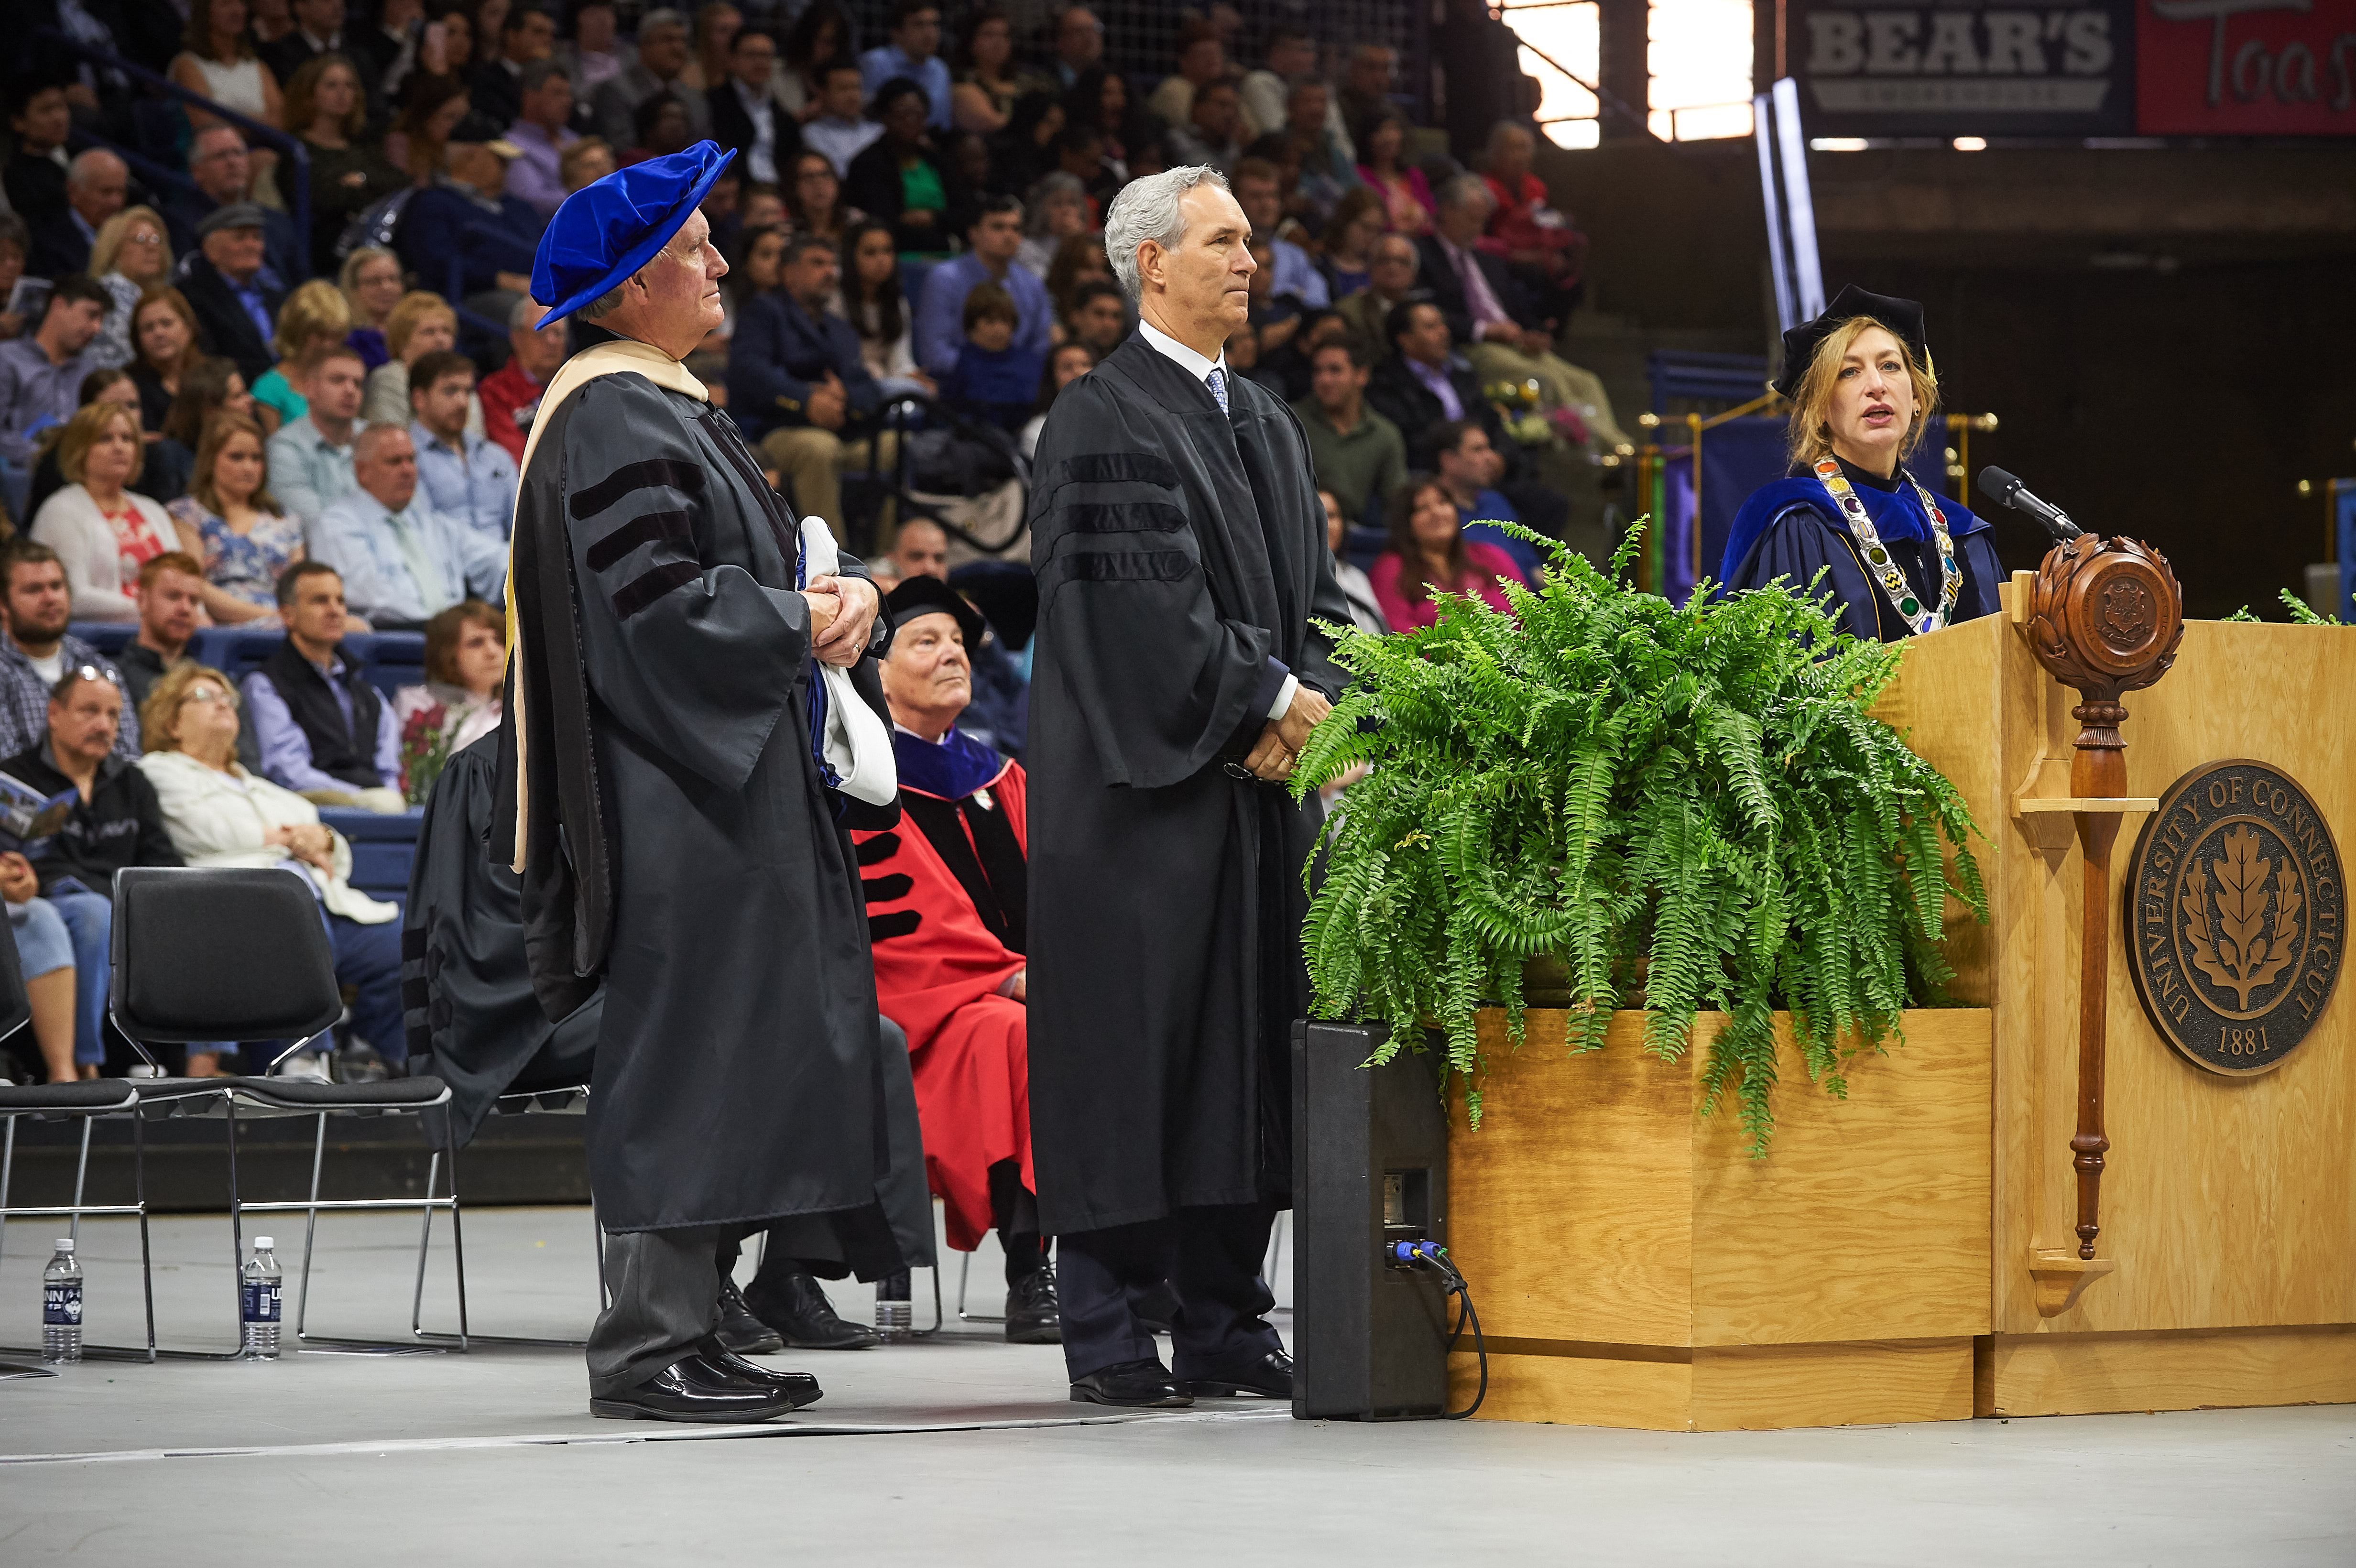 Douglas Elliot '82 (BUS), center, listens as President Susan Herbst, right, reads the citation and Lawrence Gramling, associate dean, holds a hood as Elliot receives an honorary degree during the School of Business Commencement ceremony at Gampel Pavilion on May 7, 2017. (Peter Morenus/UConn Photo)